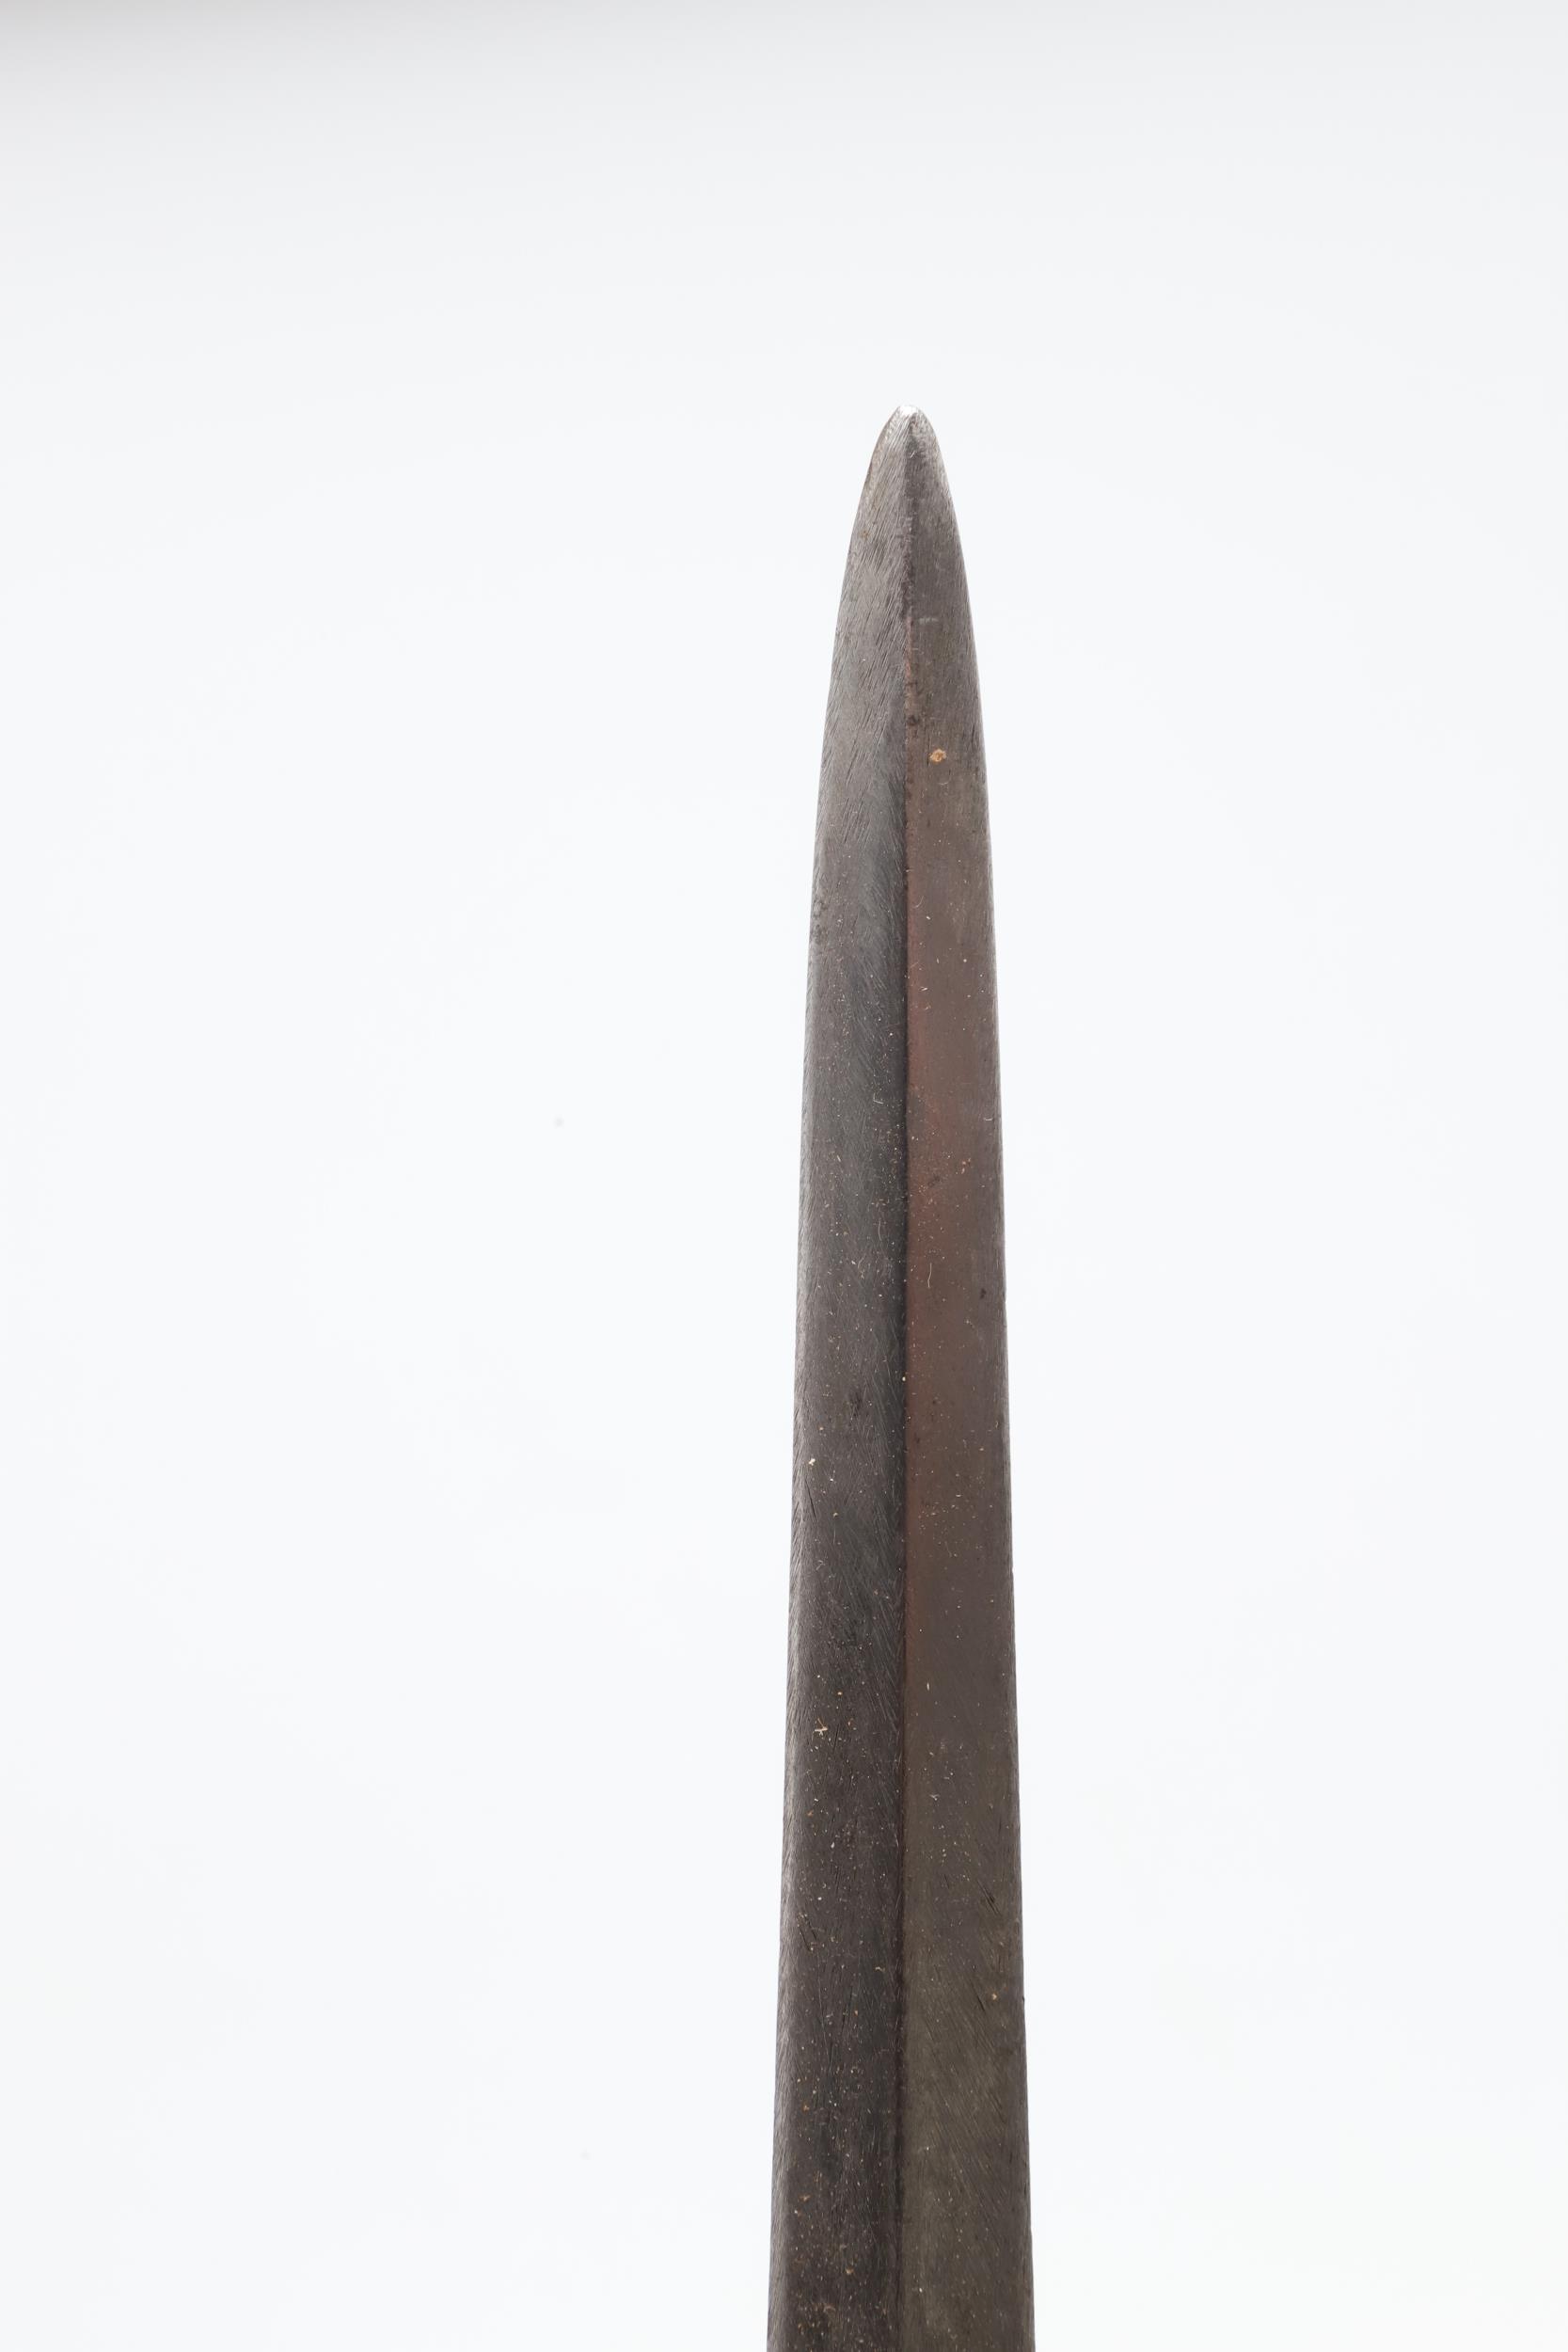 A WILKINSON SWORD FAIRBAIRN SYKES FIGHTING KNIFE. SIMILAR TO SECOND PATTERN. - Image 10 of 10